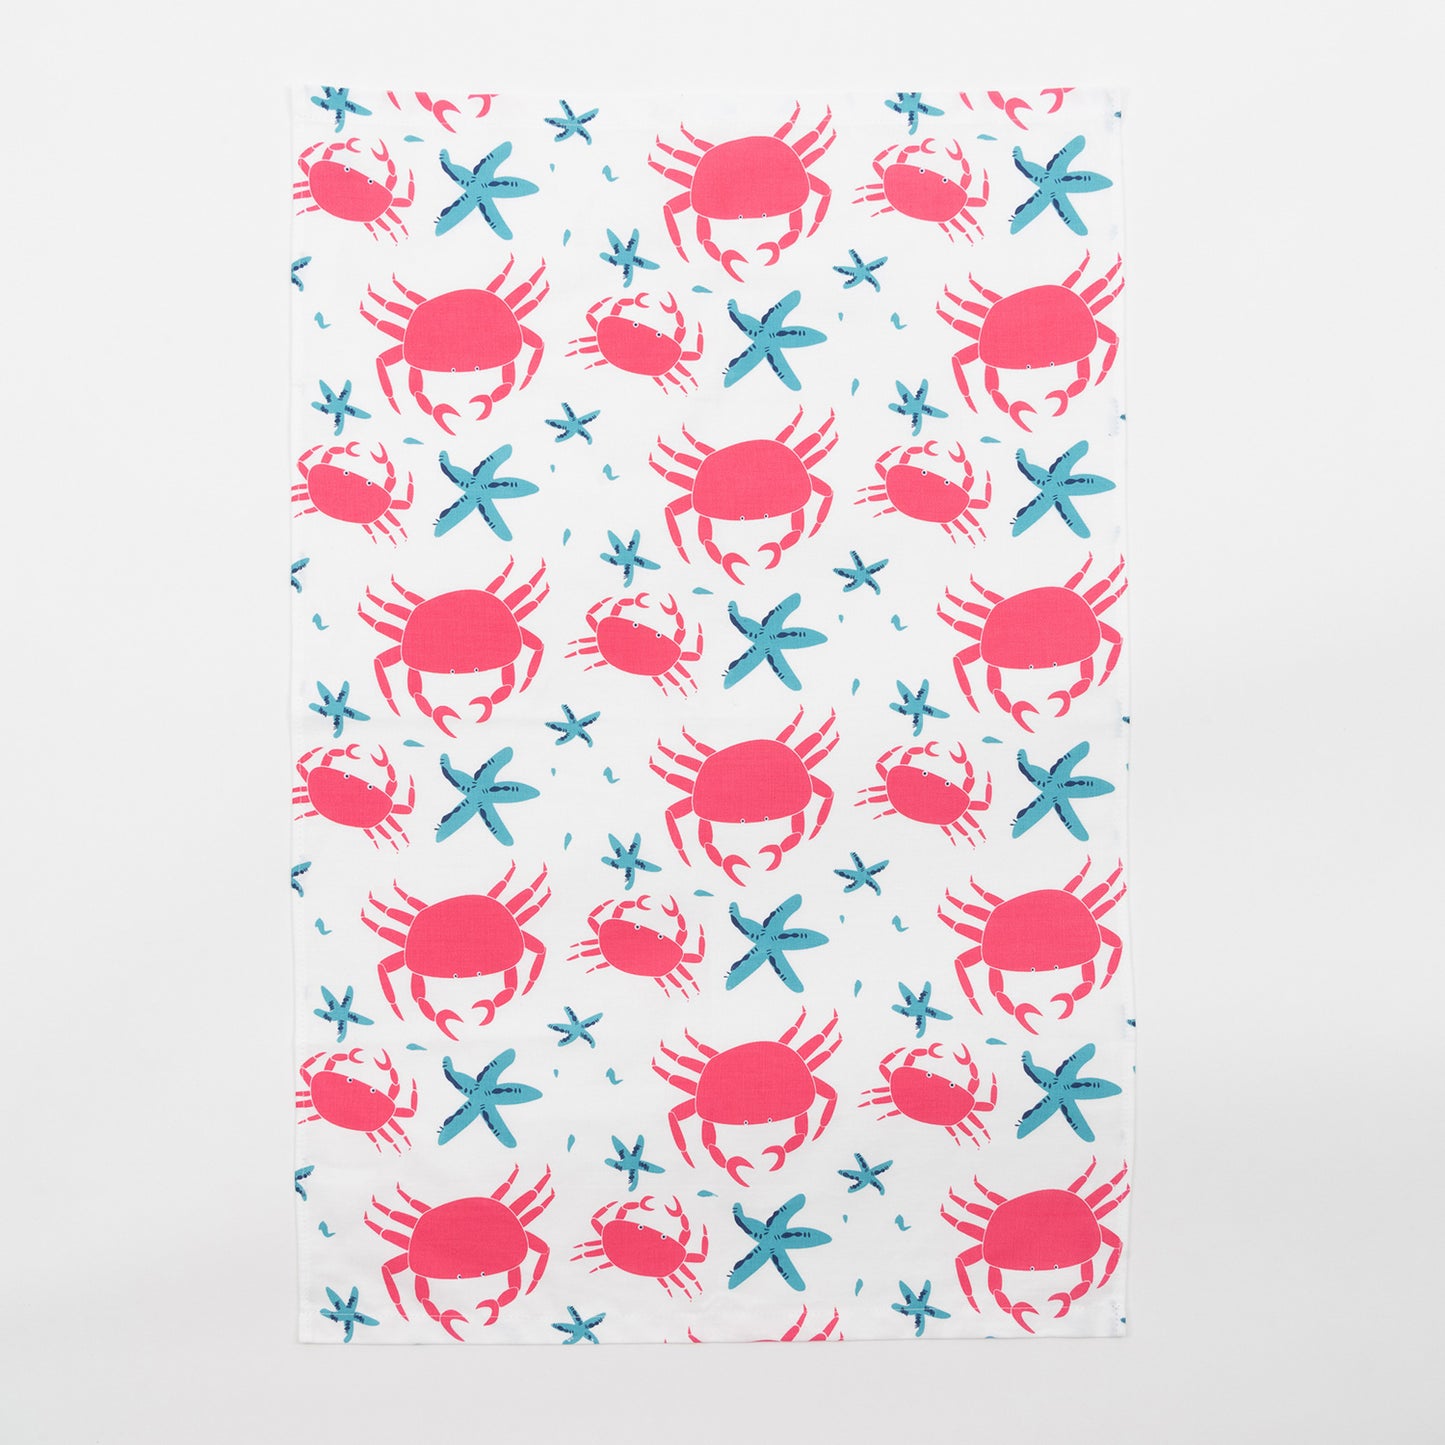 The crab and starfish tea towel features pink crabs and blue starfish on a light cream background. The tea towel is against a white background.